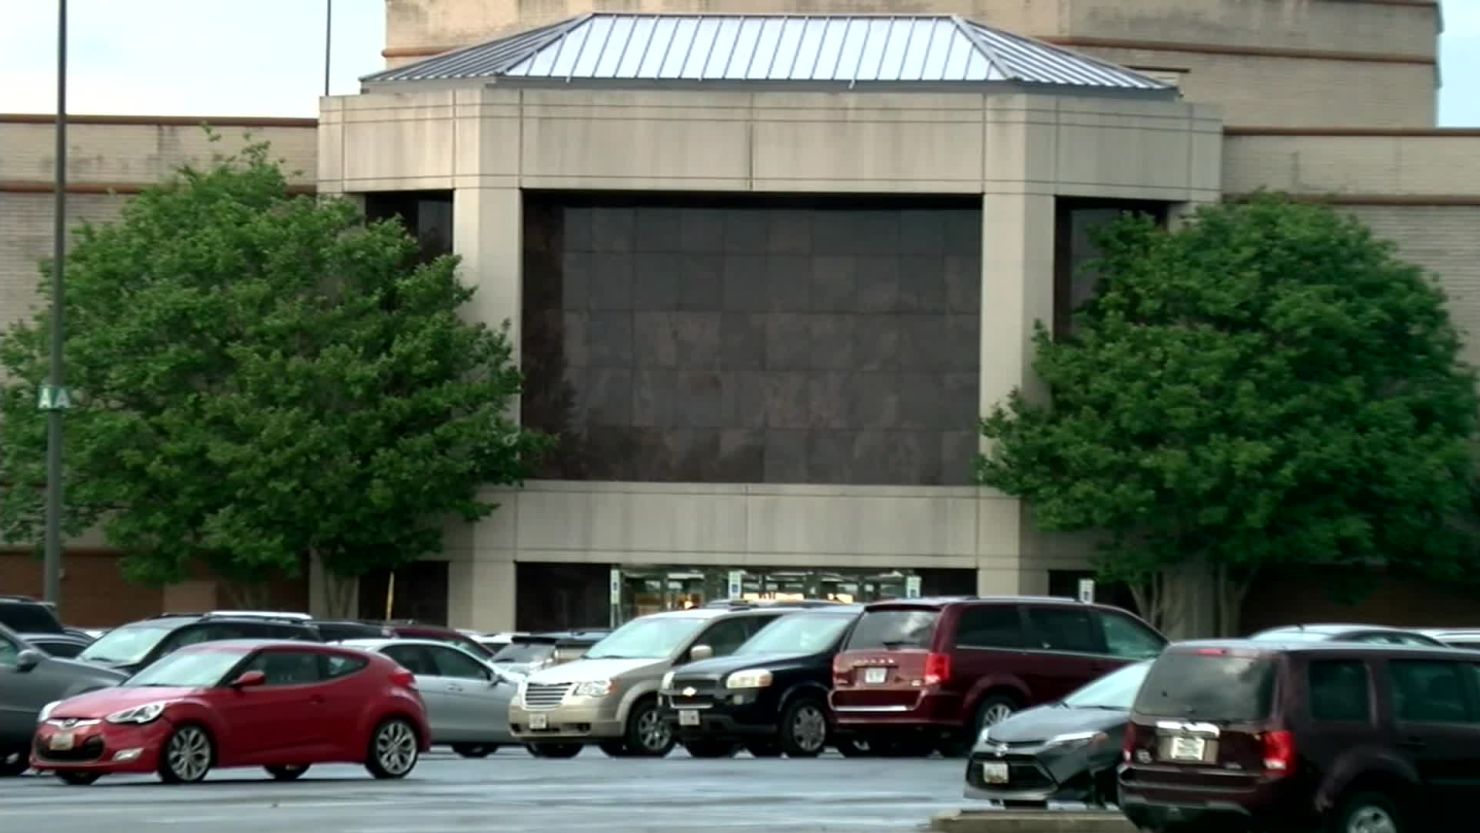 Police say a woman who left seven children in a hot car was shopping inside St. Charles Towne Center.